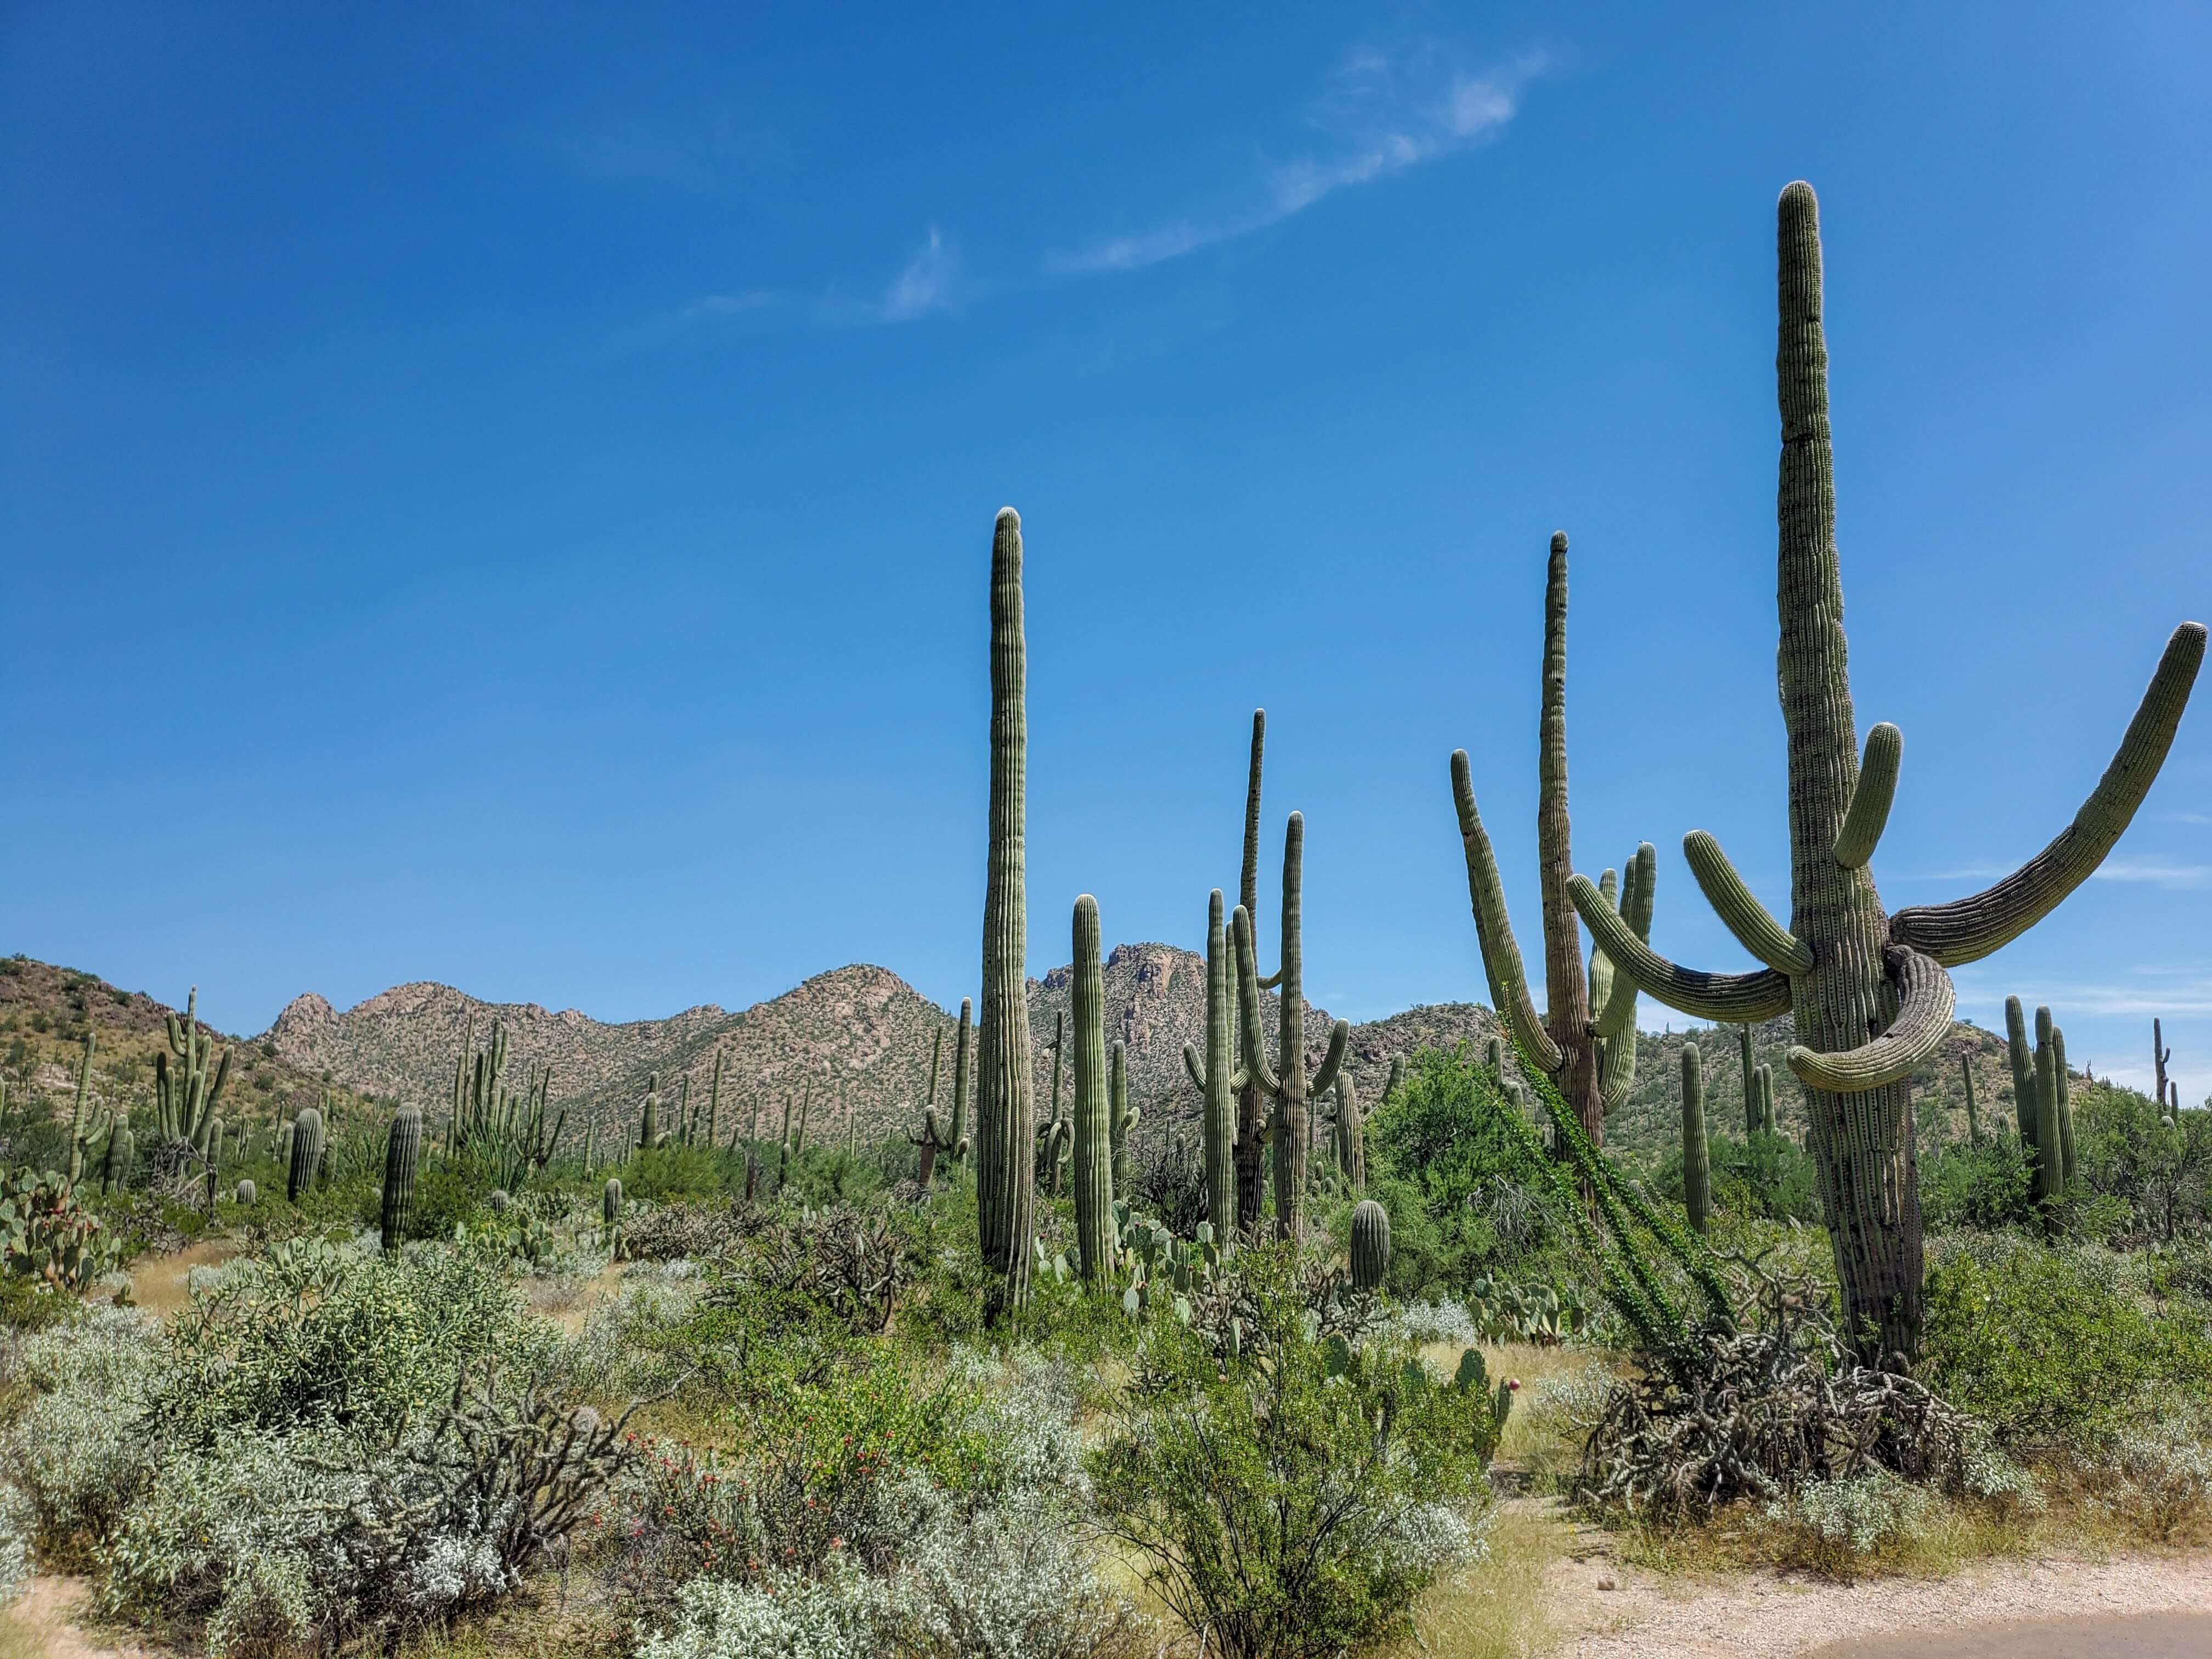 A stand of saguaro cacti and other desert plants in front of hills and a blue sky in Saguaro National Park